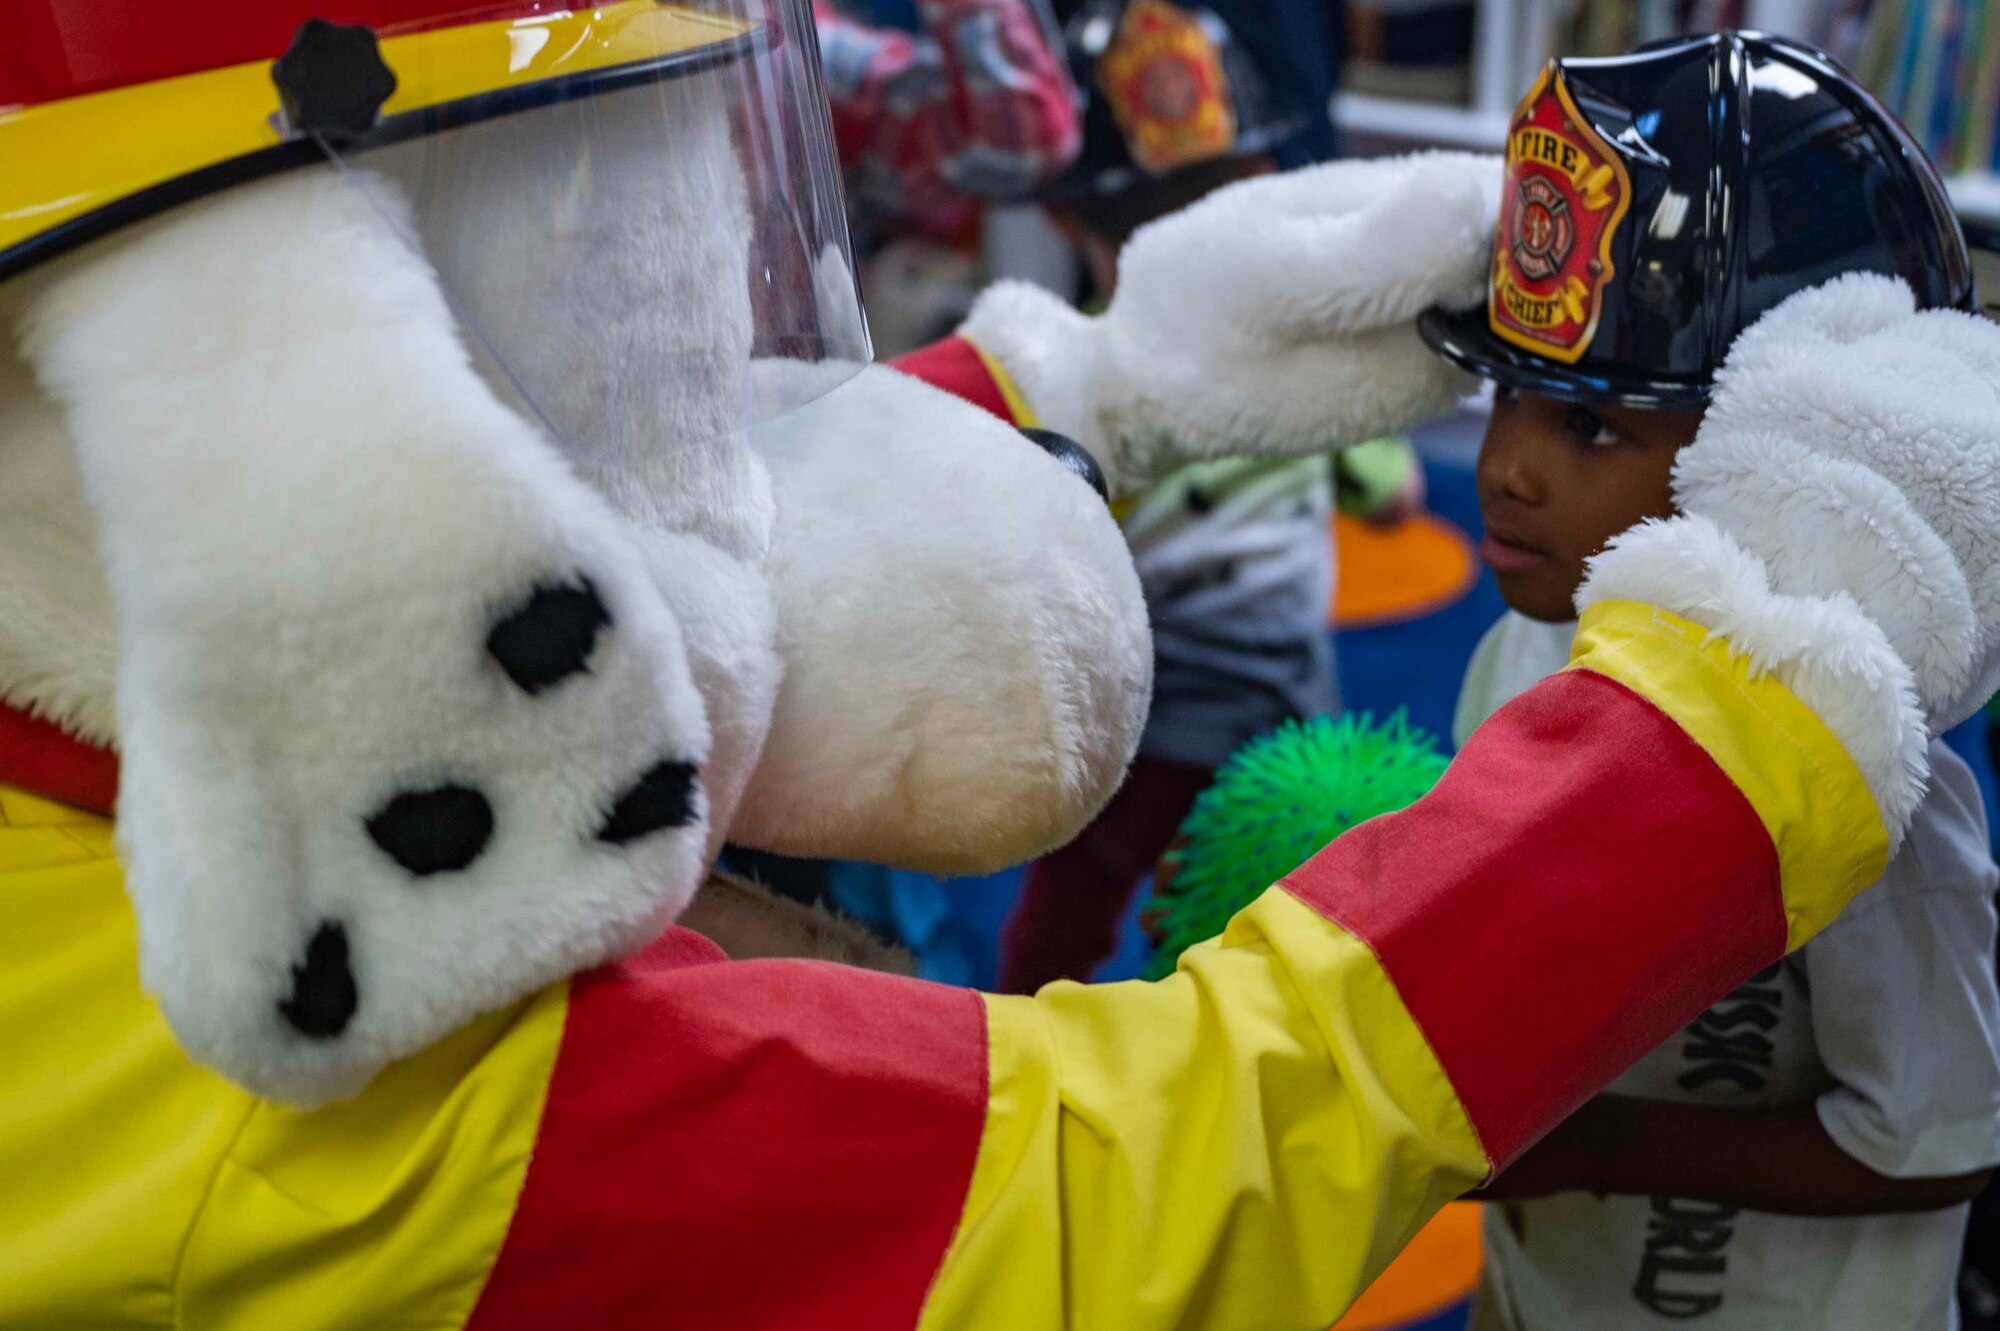 Sparky the Fire Dog gives out fire helmets during a visit by the 100th Civil Engineer Squadron Fire Department to the 100th Force Support Squadron Child Development Center at Royal Air Force Mildenhall, England, Oct. 11, 2023. Sparky the Fire Dog is a Dalmatian who has been the official mascot of National Fire Protection Association, a U.S. organization in charge of creating and maintaining minimum standards and requirements for fire prevention, suppression training, and equipment since 1951. (U.S. Air Force photo by Senior Airman Viviam Chiu)